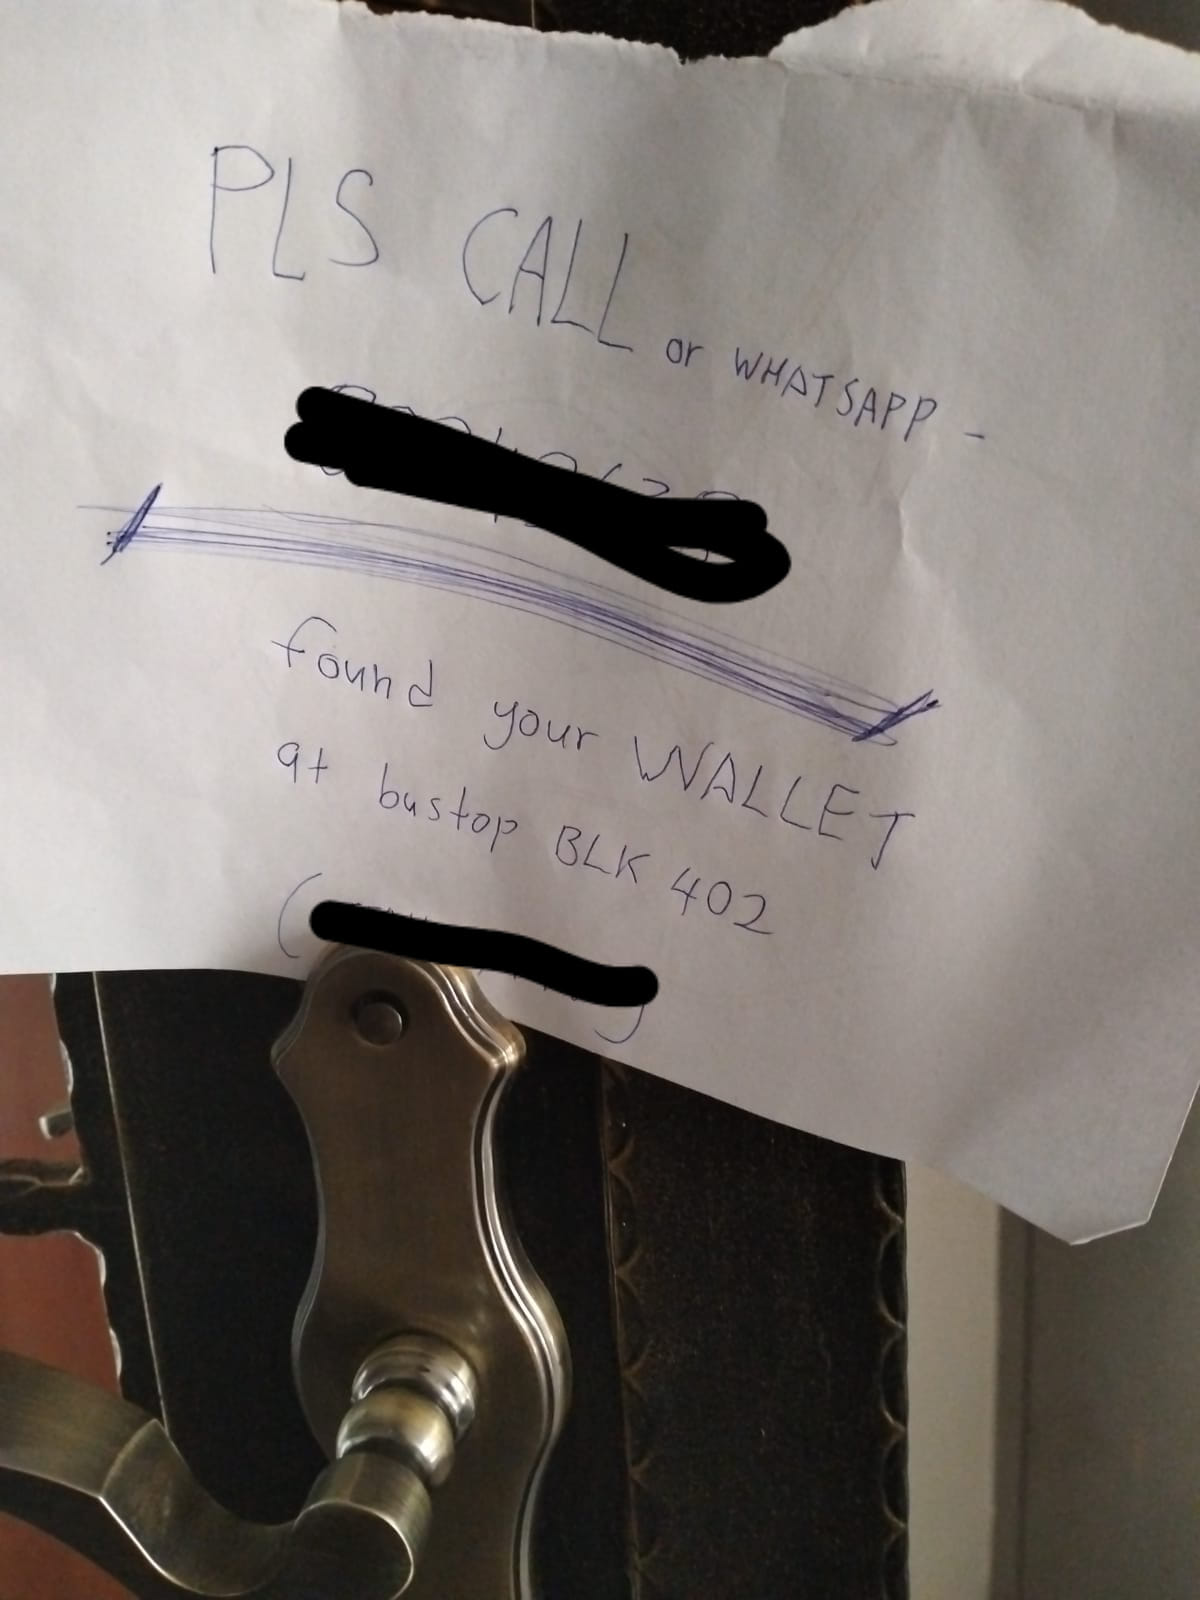 Letter left at the wallet's owner house